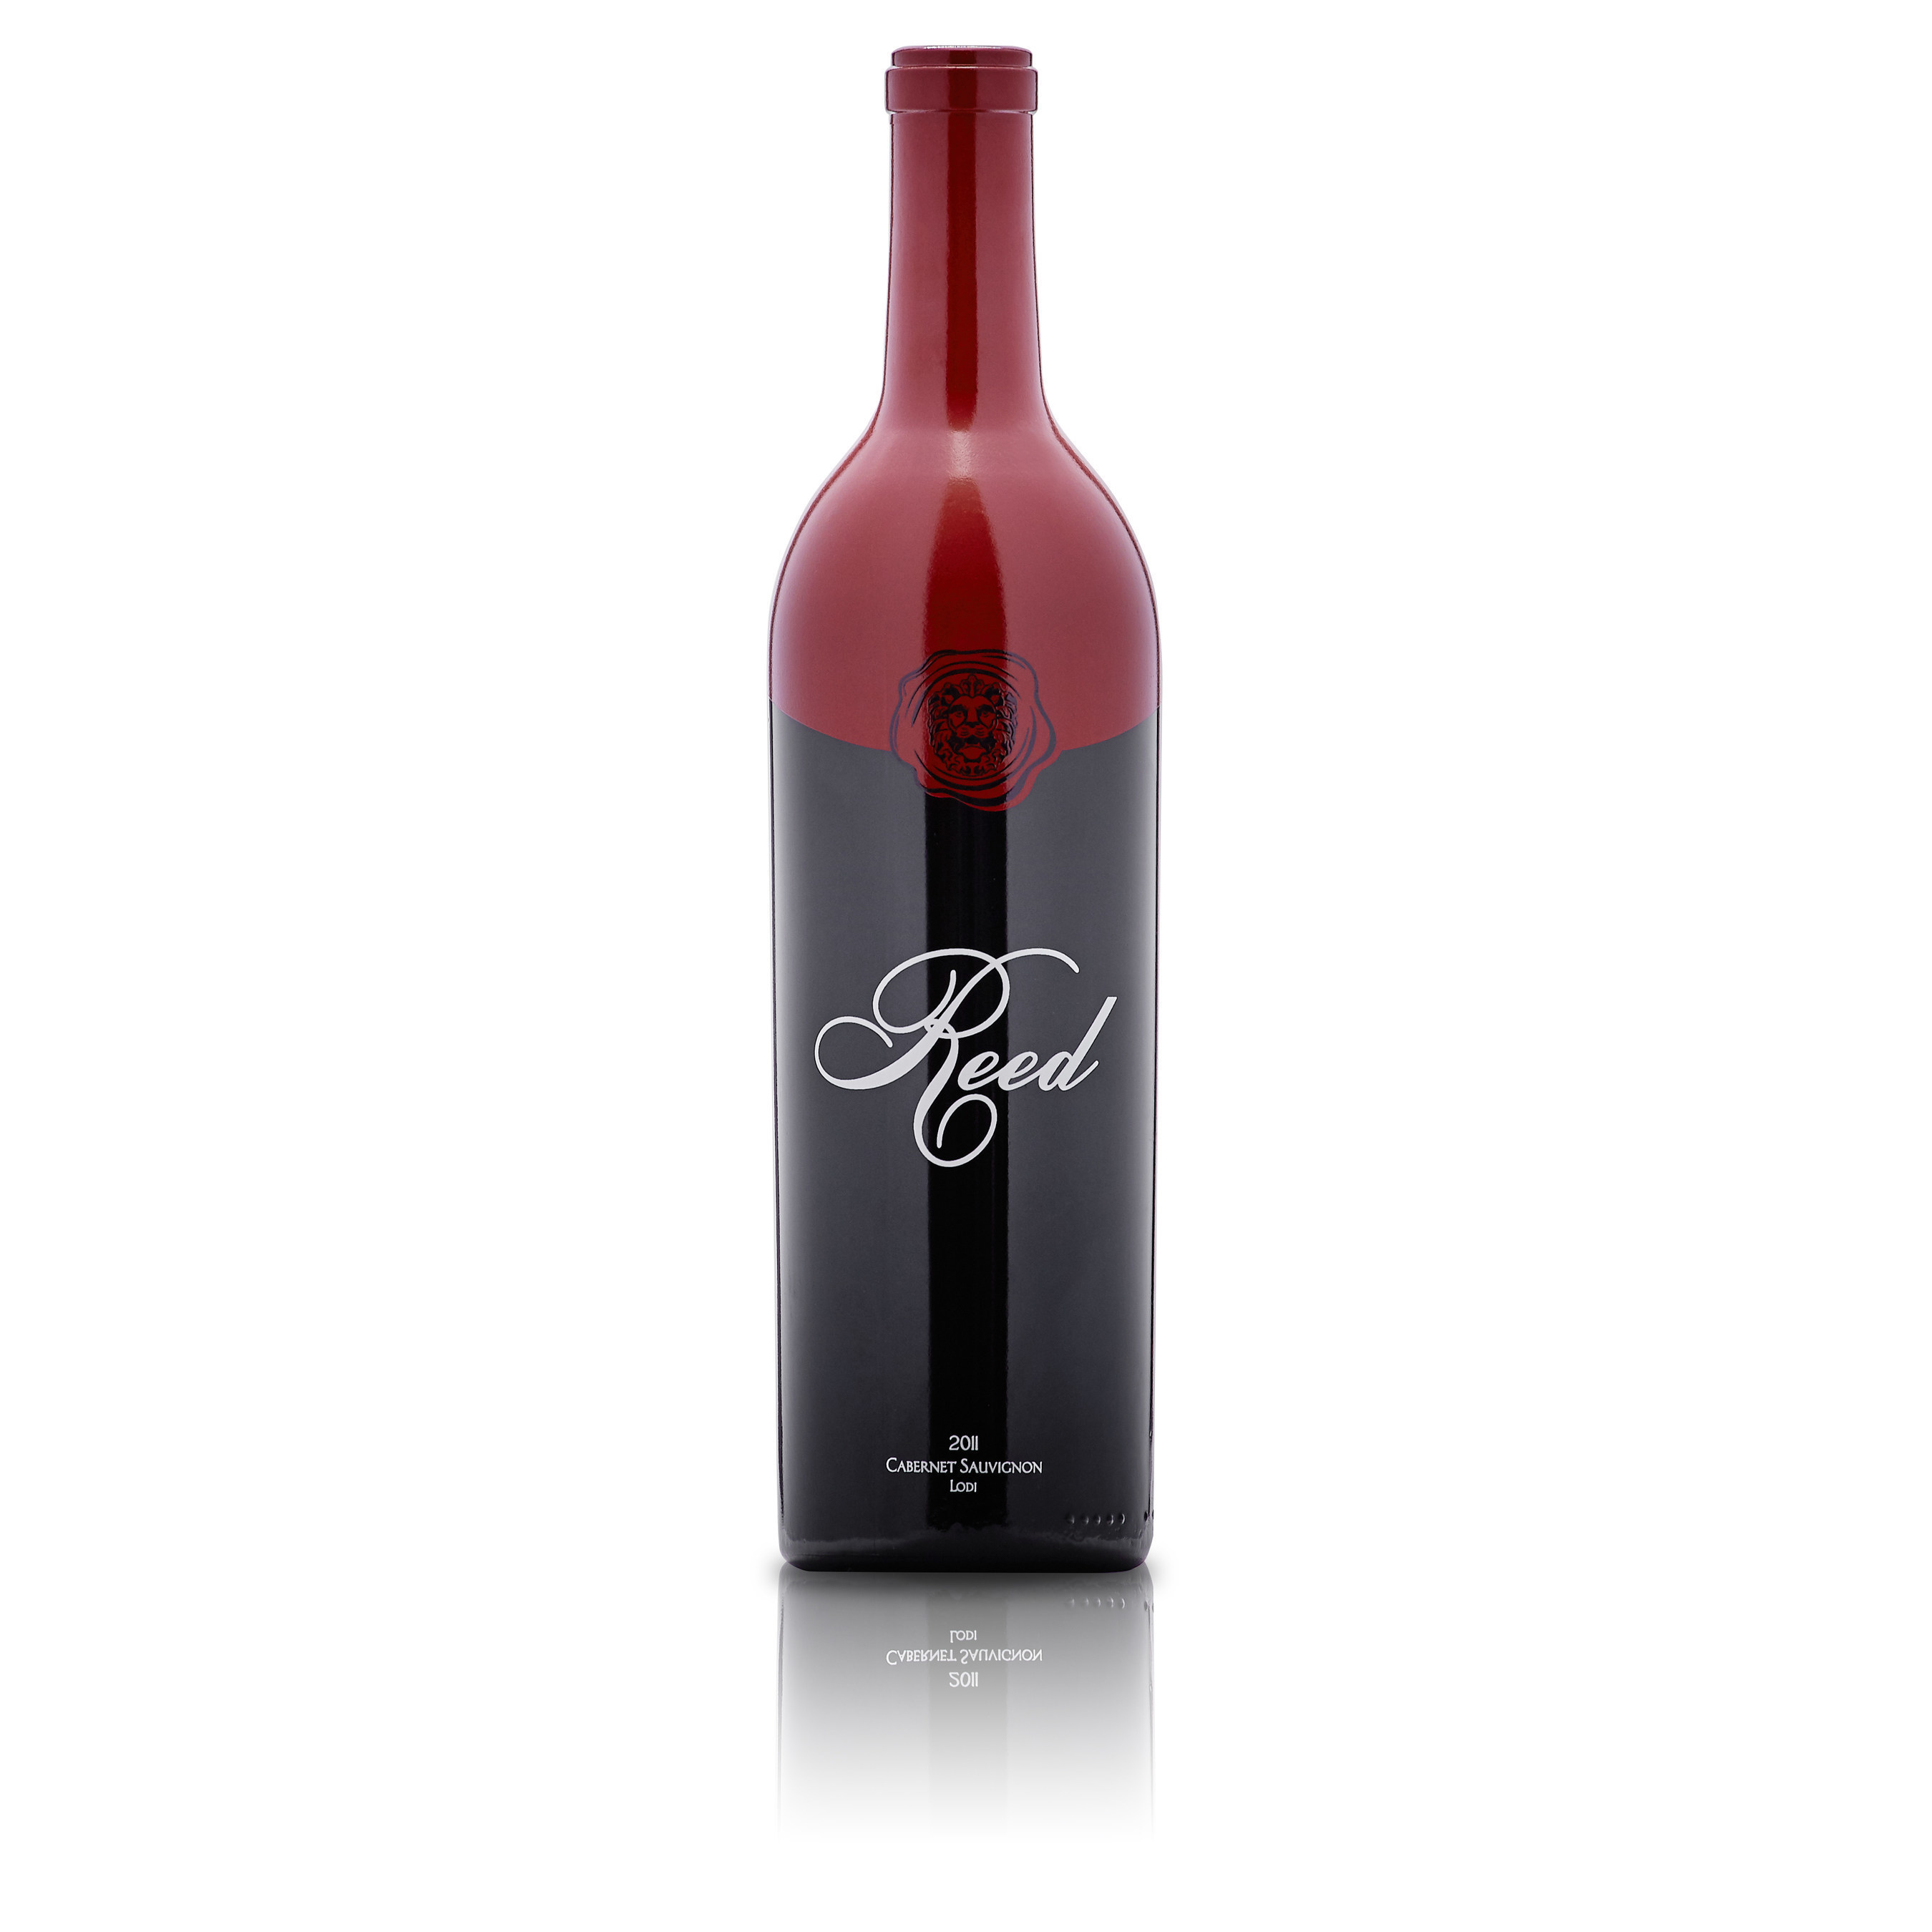 2016 Design Competition Winner: Reed Cabernet bottle designed by Quest Industries